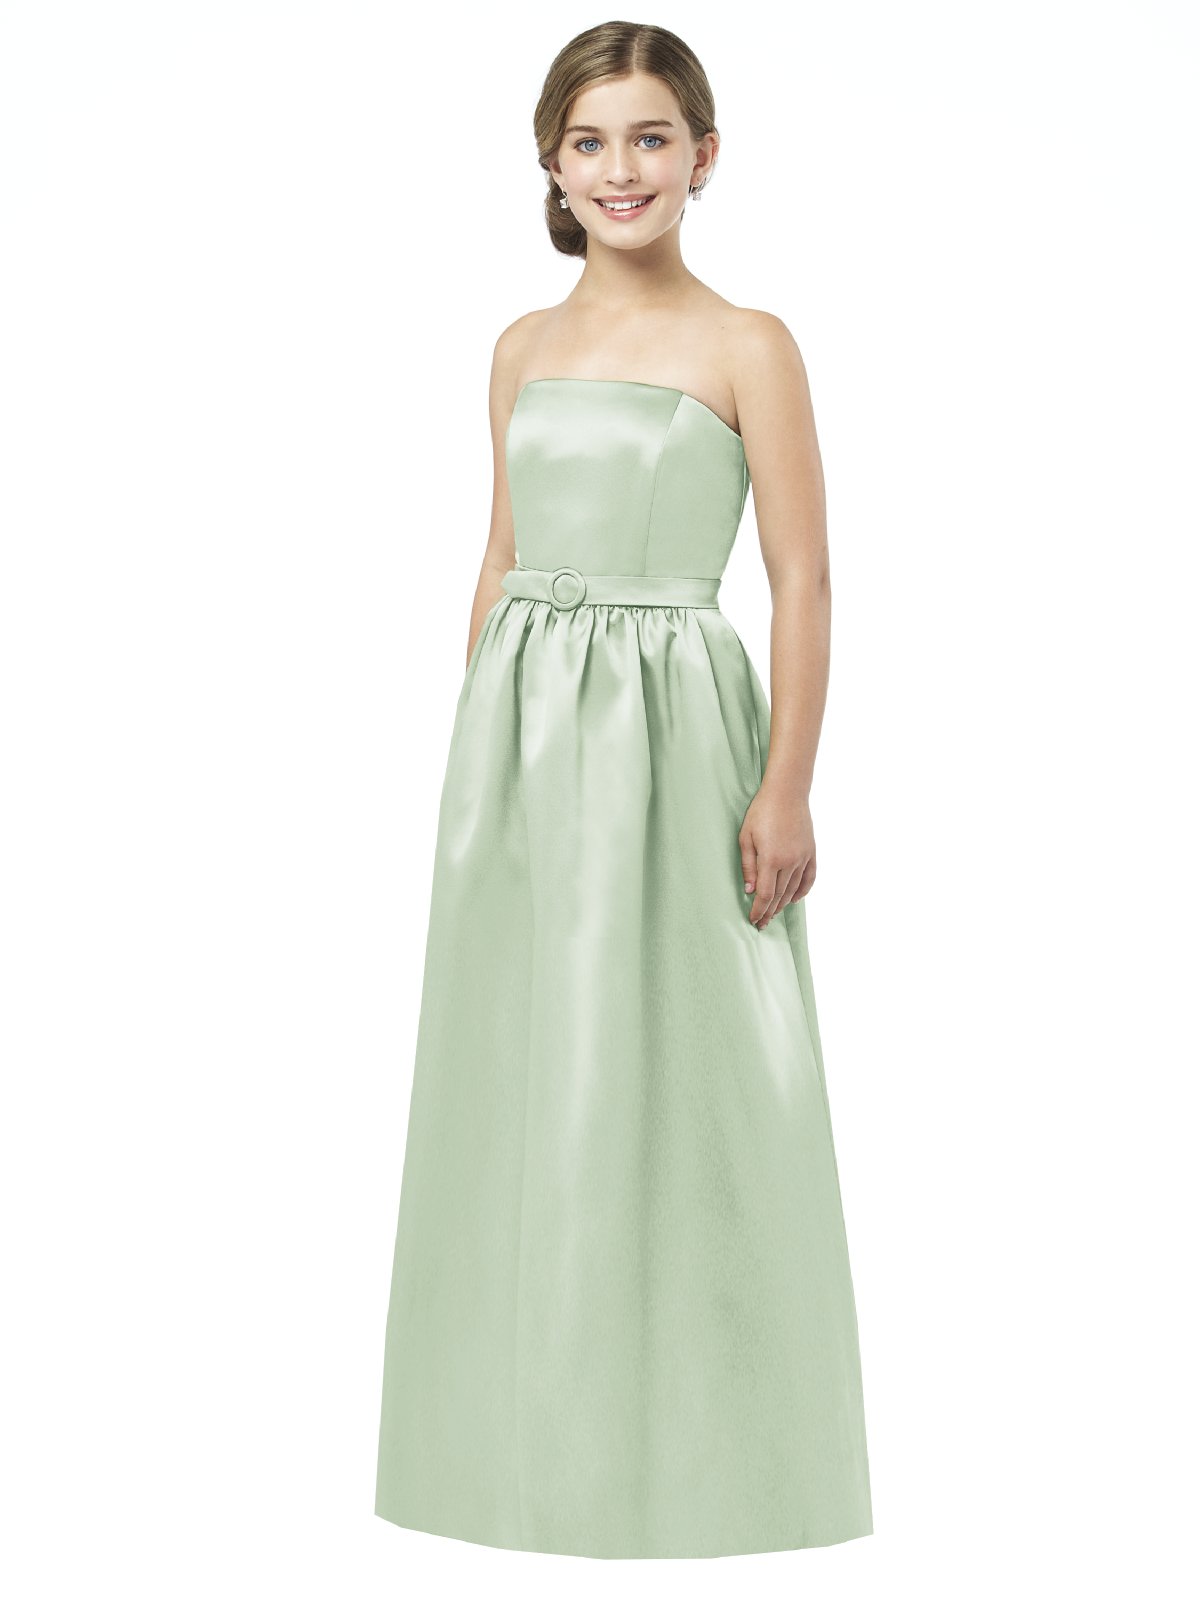 Pale Sage A Line Strapless Zipper Floor Length Satin Prom Dresses With Belt And Draped Skirt 